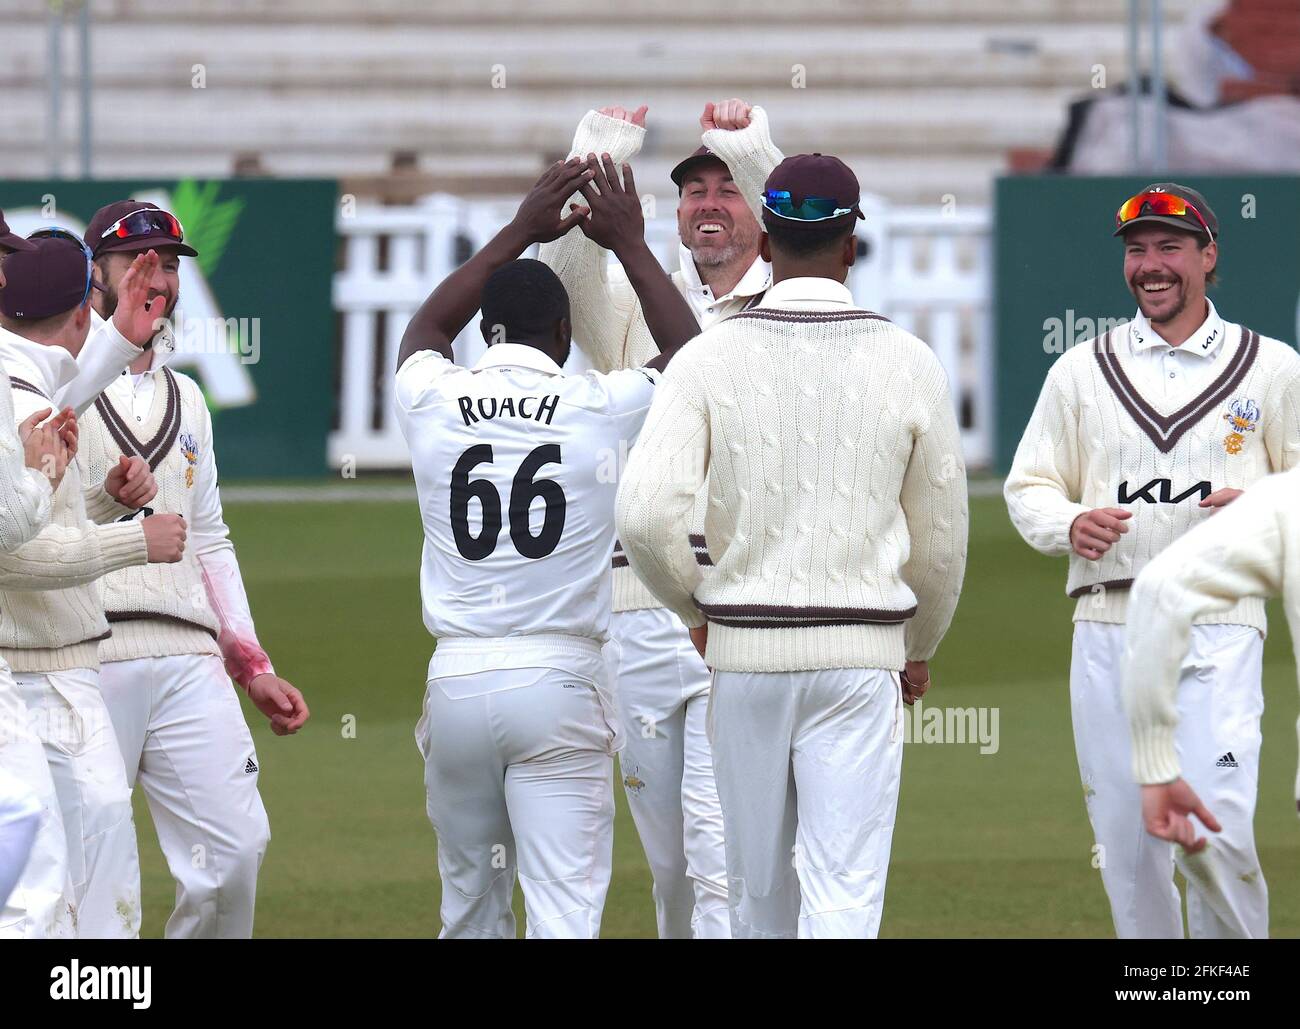 1 May, 2021. London, UK. Surrey’s Kemar Roach celebrates with team mates after getting the wicket of Hampshire’s Liam Dawson as Surrey take on Hampshire in  the County Championship at the Kia Oval, day three David Rowe/Alamy Live News Stock Photo